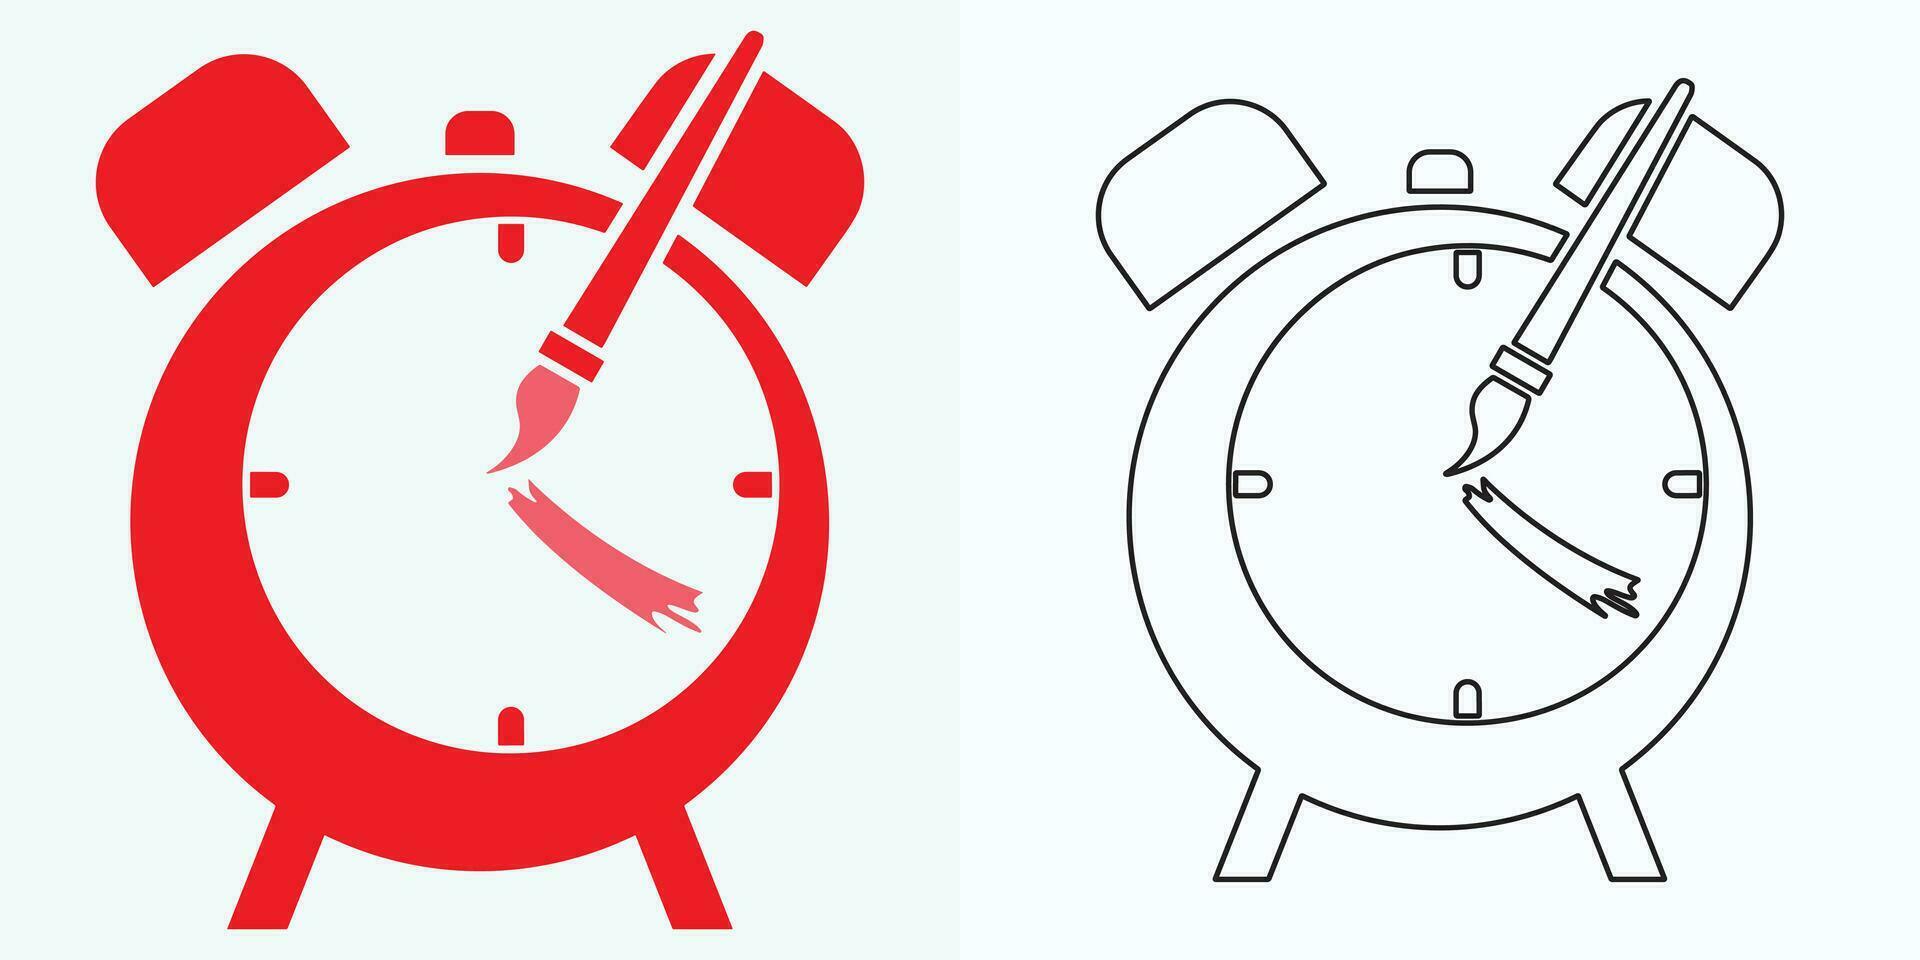 new style Analog clock flat vector icon. Symbol of time management, chronometer with hour, minute, and second arrow. Simple illustration isolated on a white background.